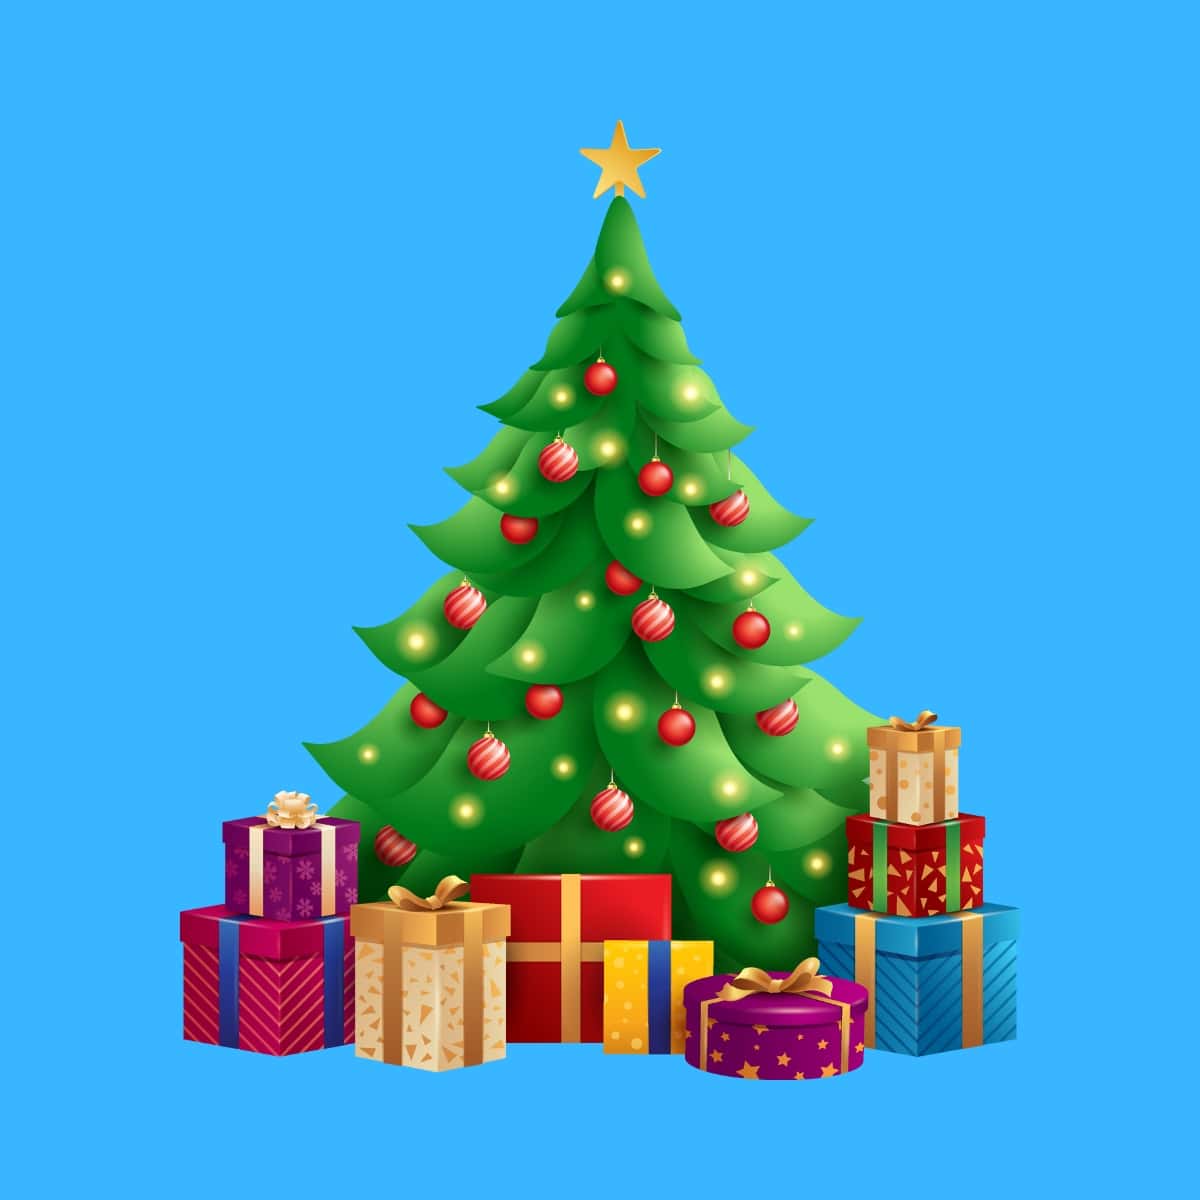 Cartoon graphic of a beautiful Christmas tree surrounded by presents on a blue background.